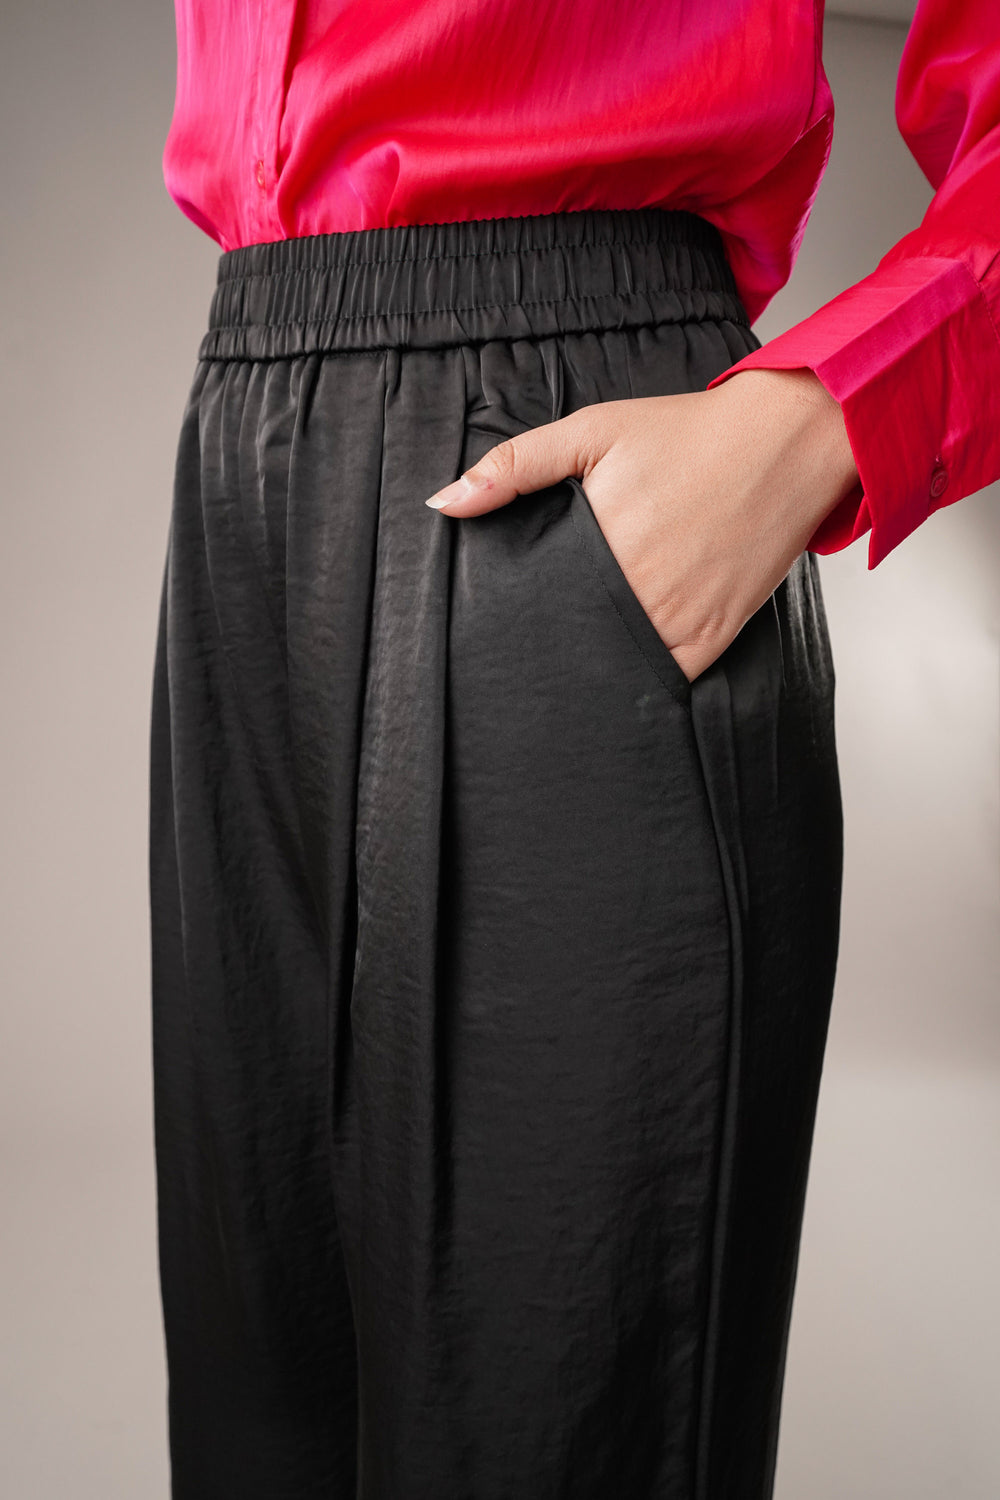 Wide leg satin pants for formal occasions